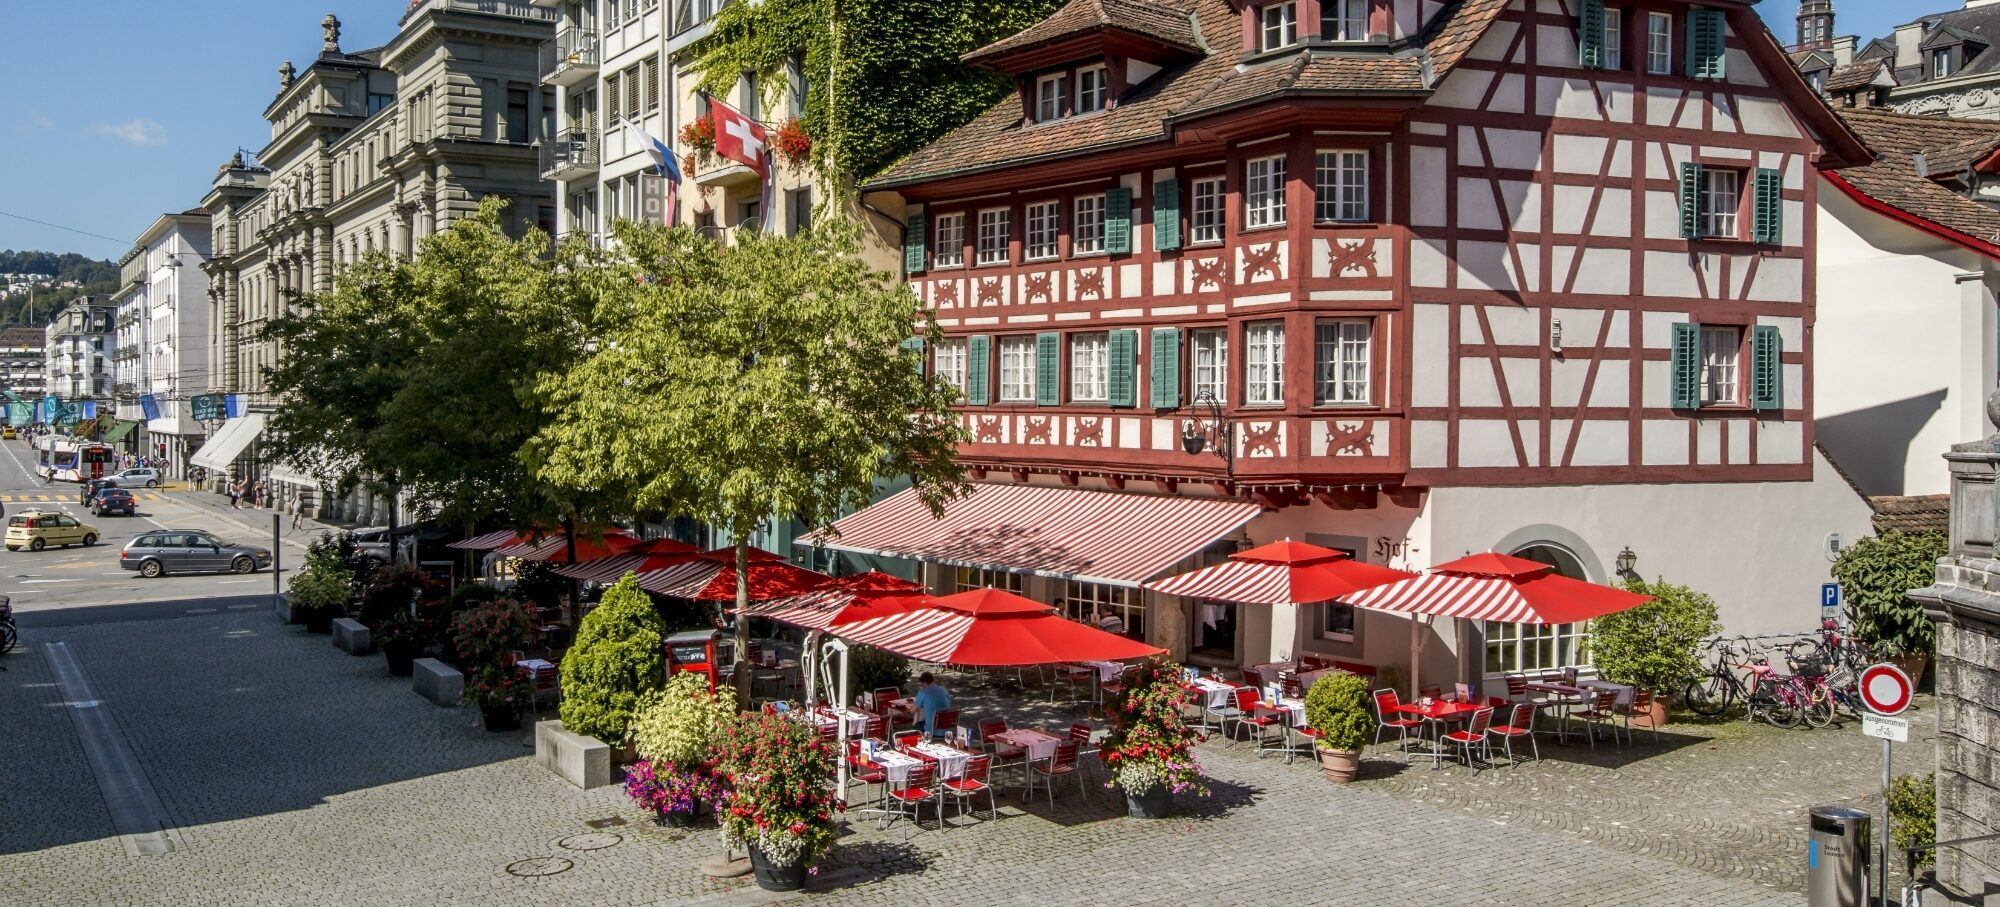 <p>Charming and historic<br
/>in Lucerne</p>